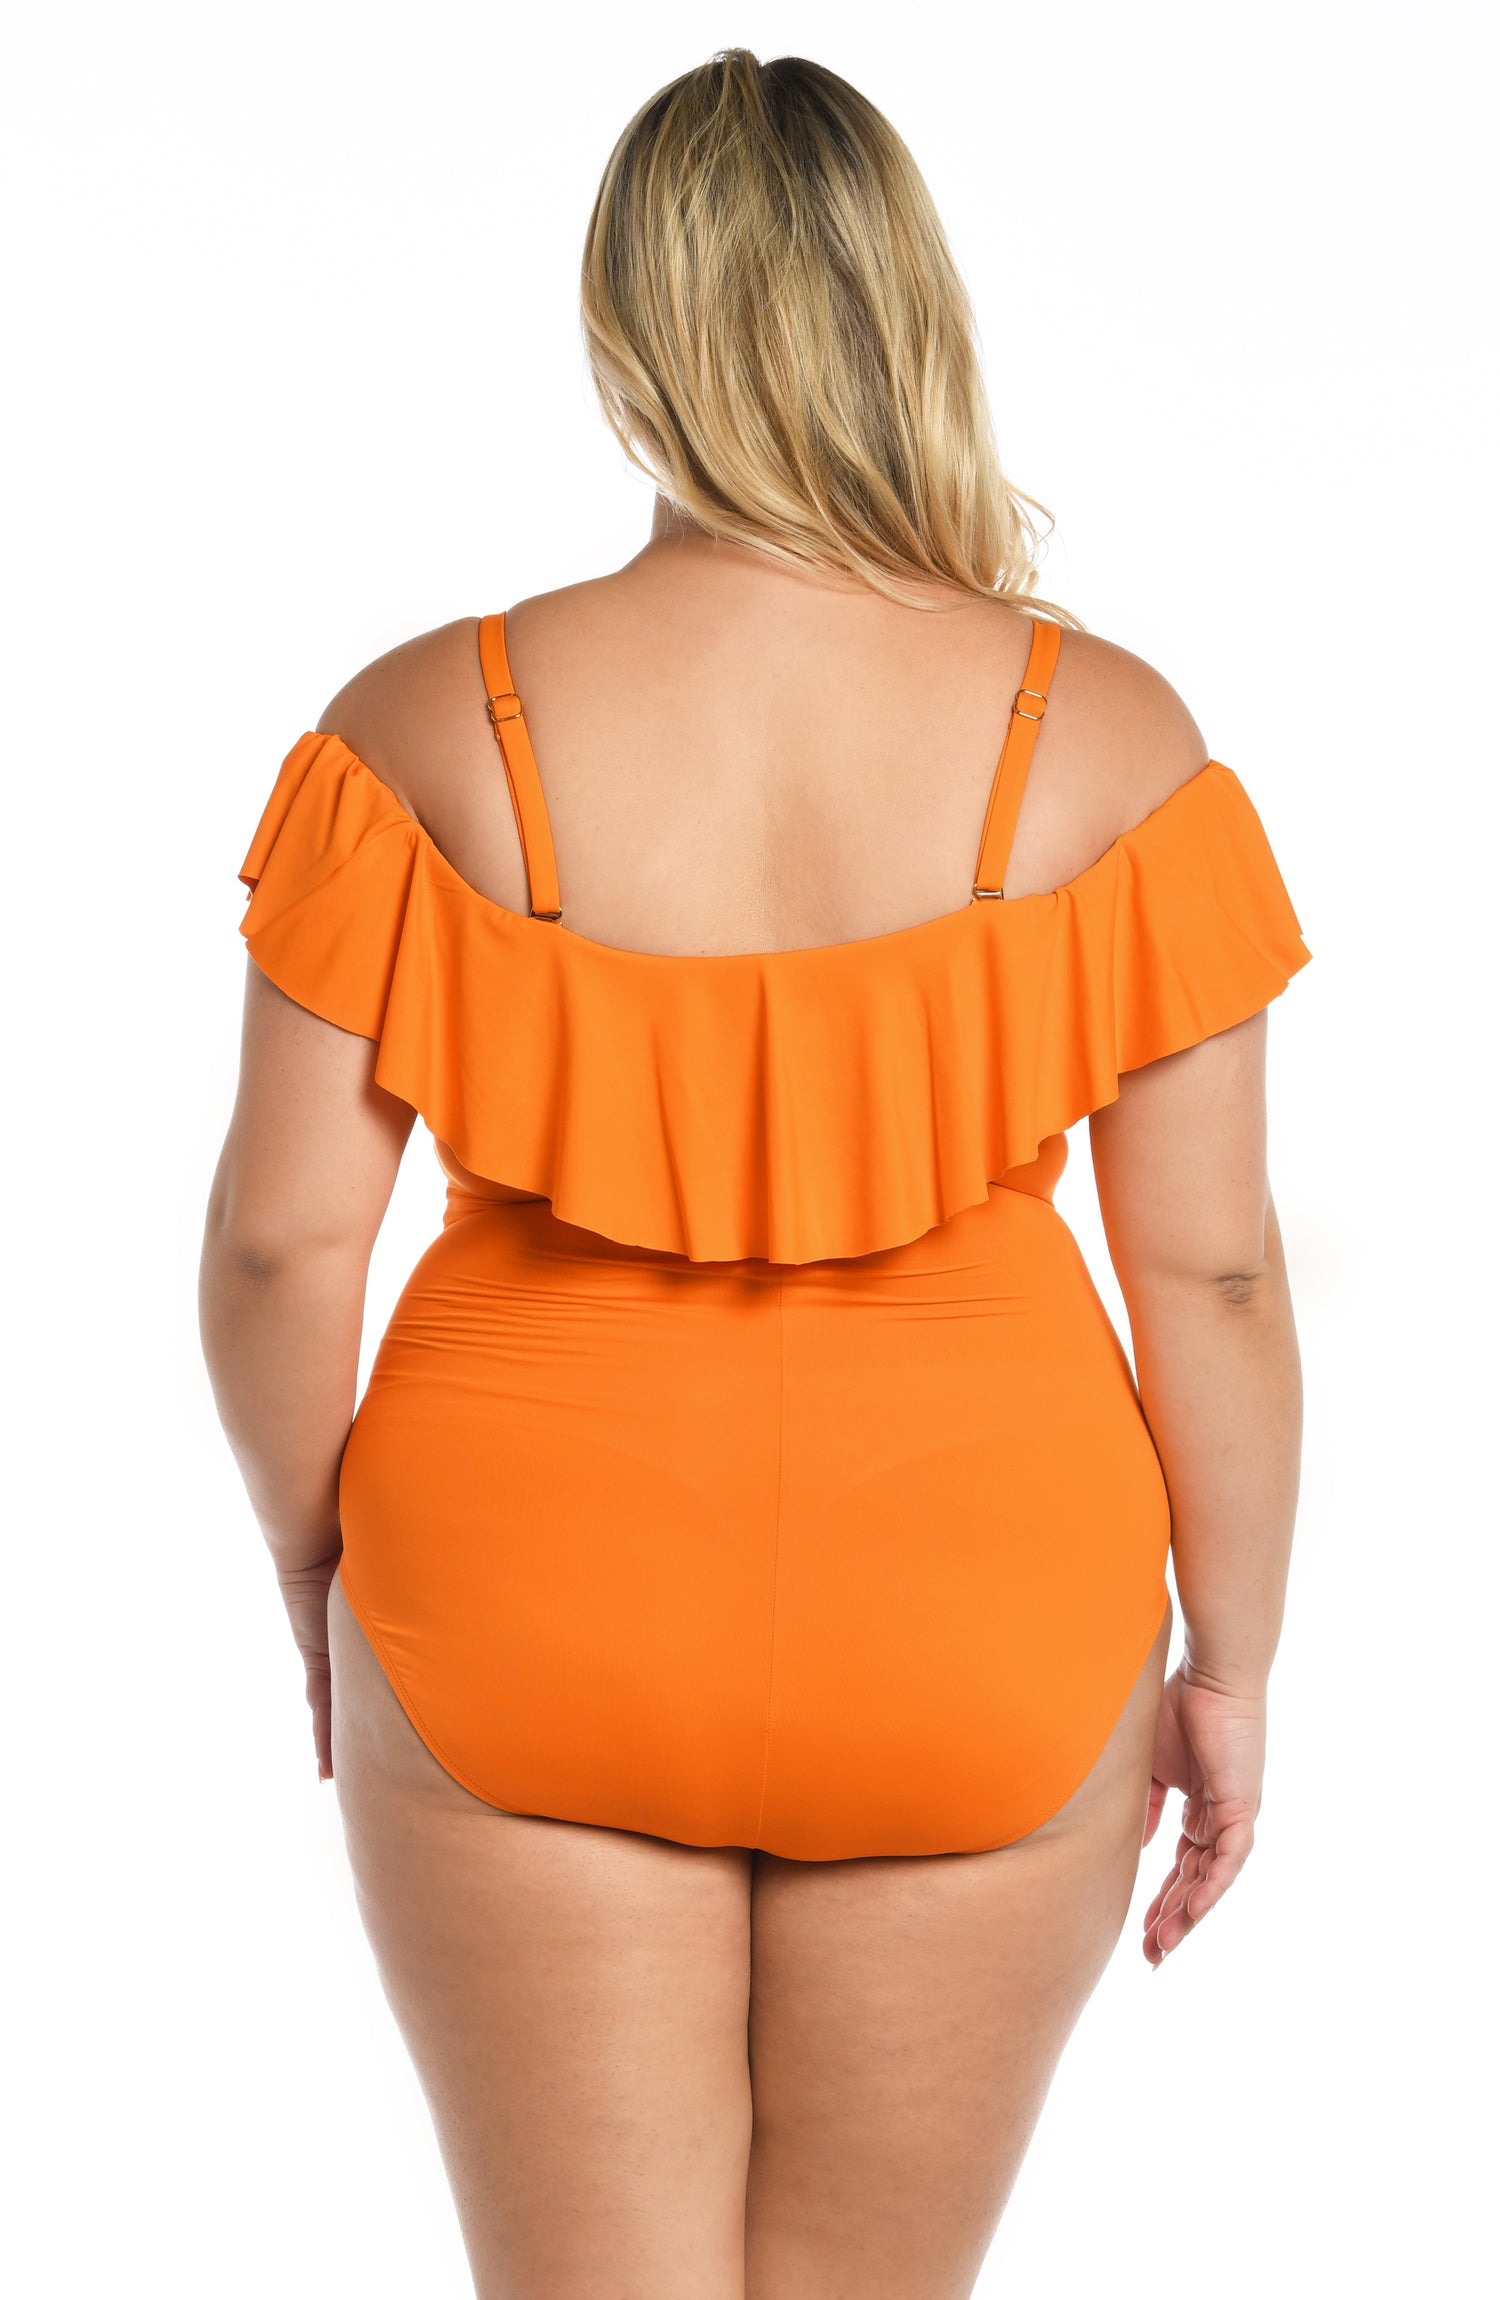 Model is wearing a tangerine colored one piece swimsuit from our Best-Selling Island Goddess collection.